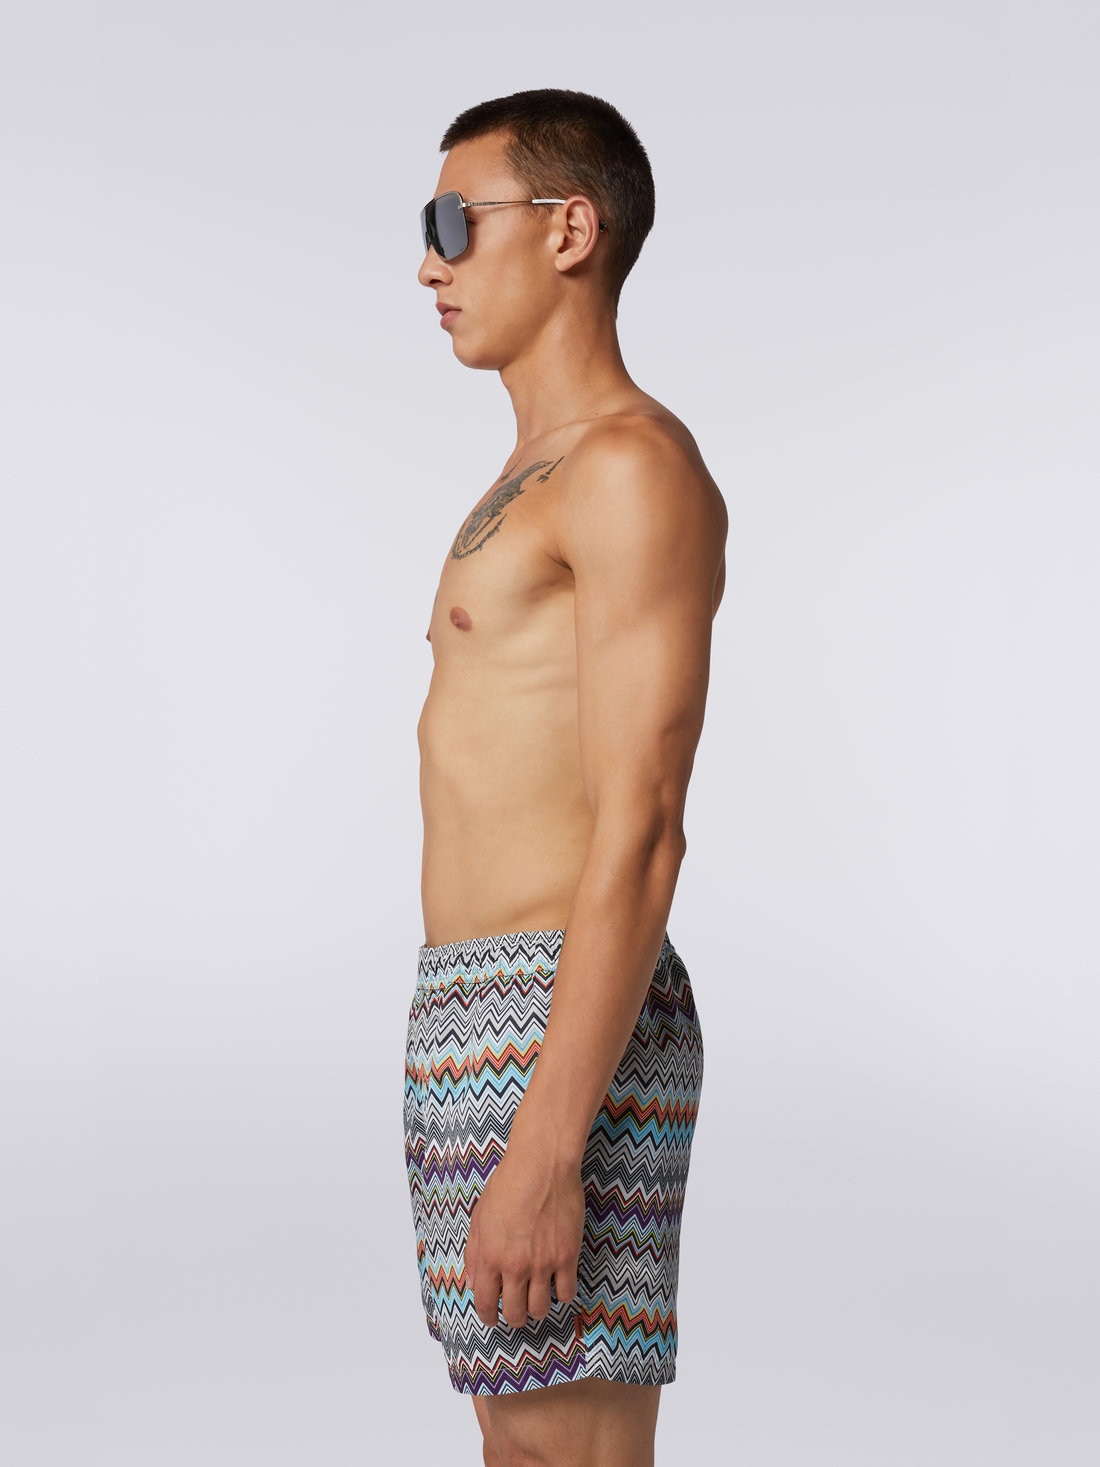 Nylon blend swimming trunks with large zigzag print, Multicoloured - US23SP04BW00M8SM8MN - 2